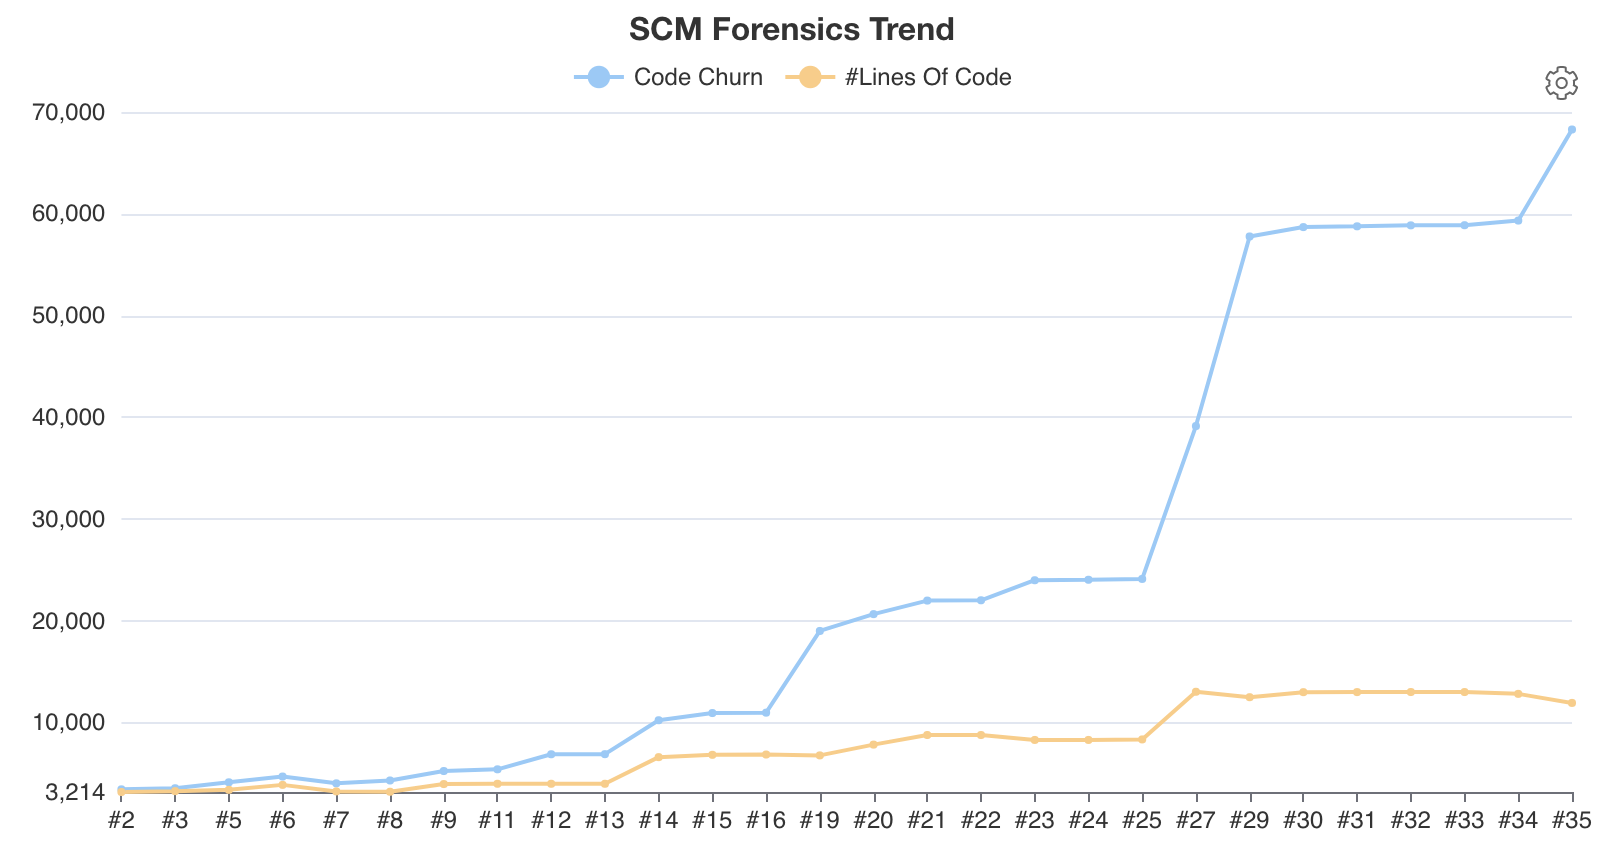 Total lines of code and churn trend chart